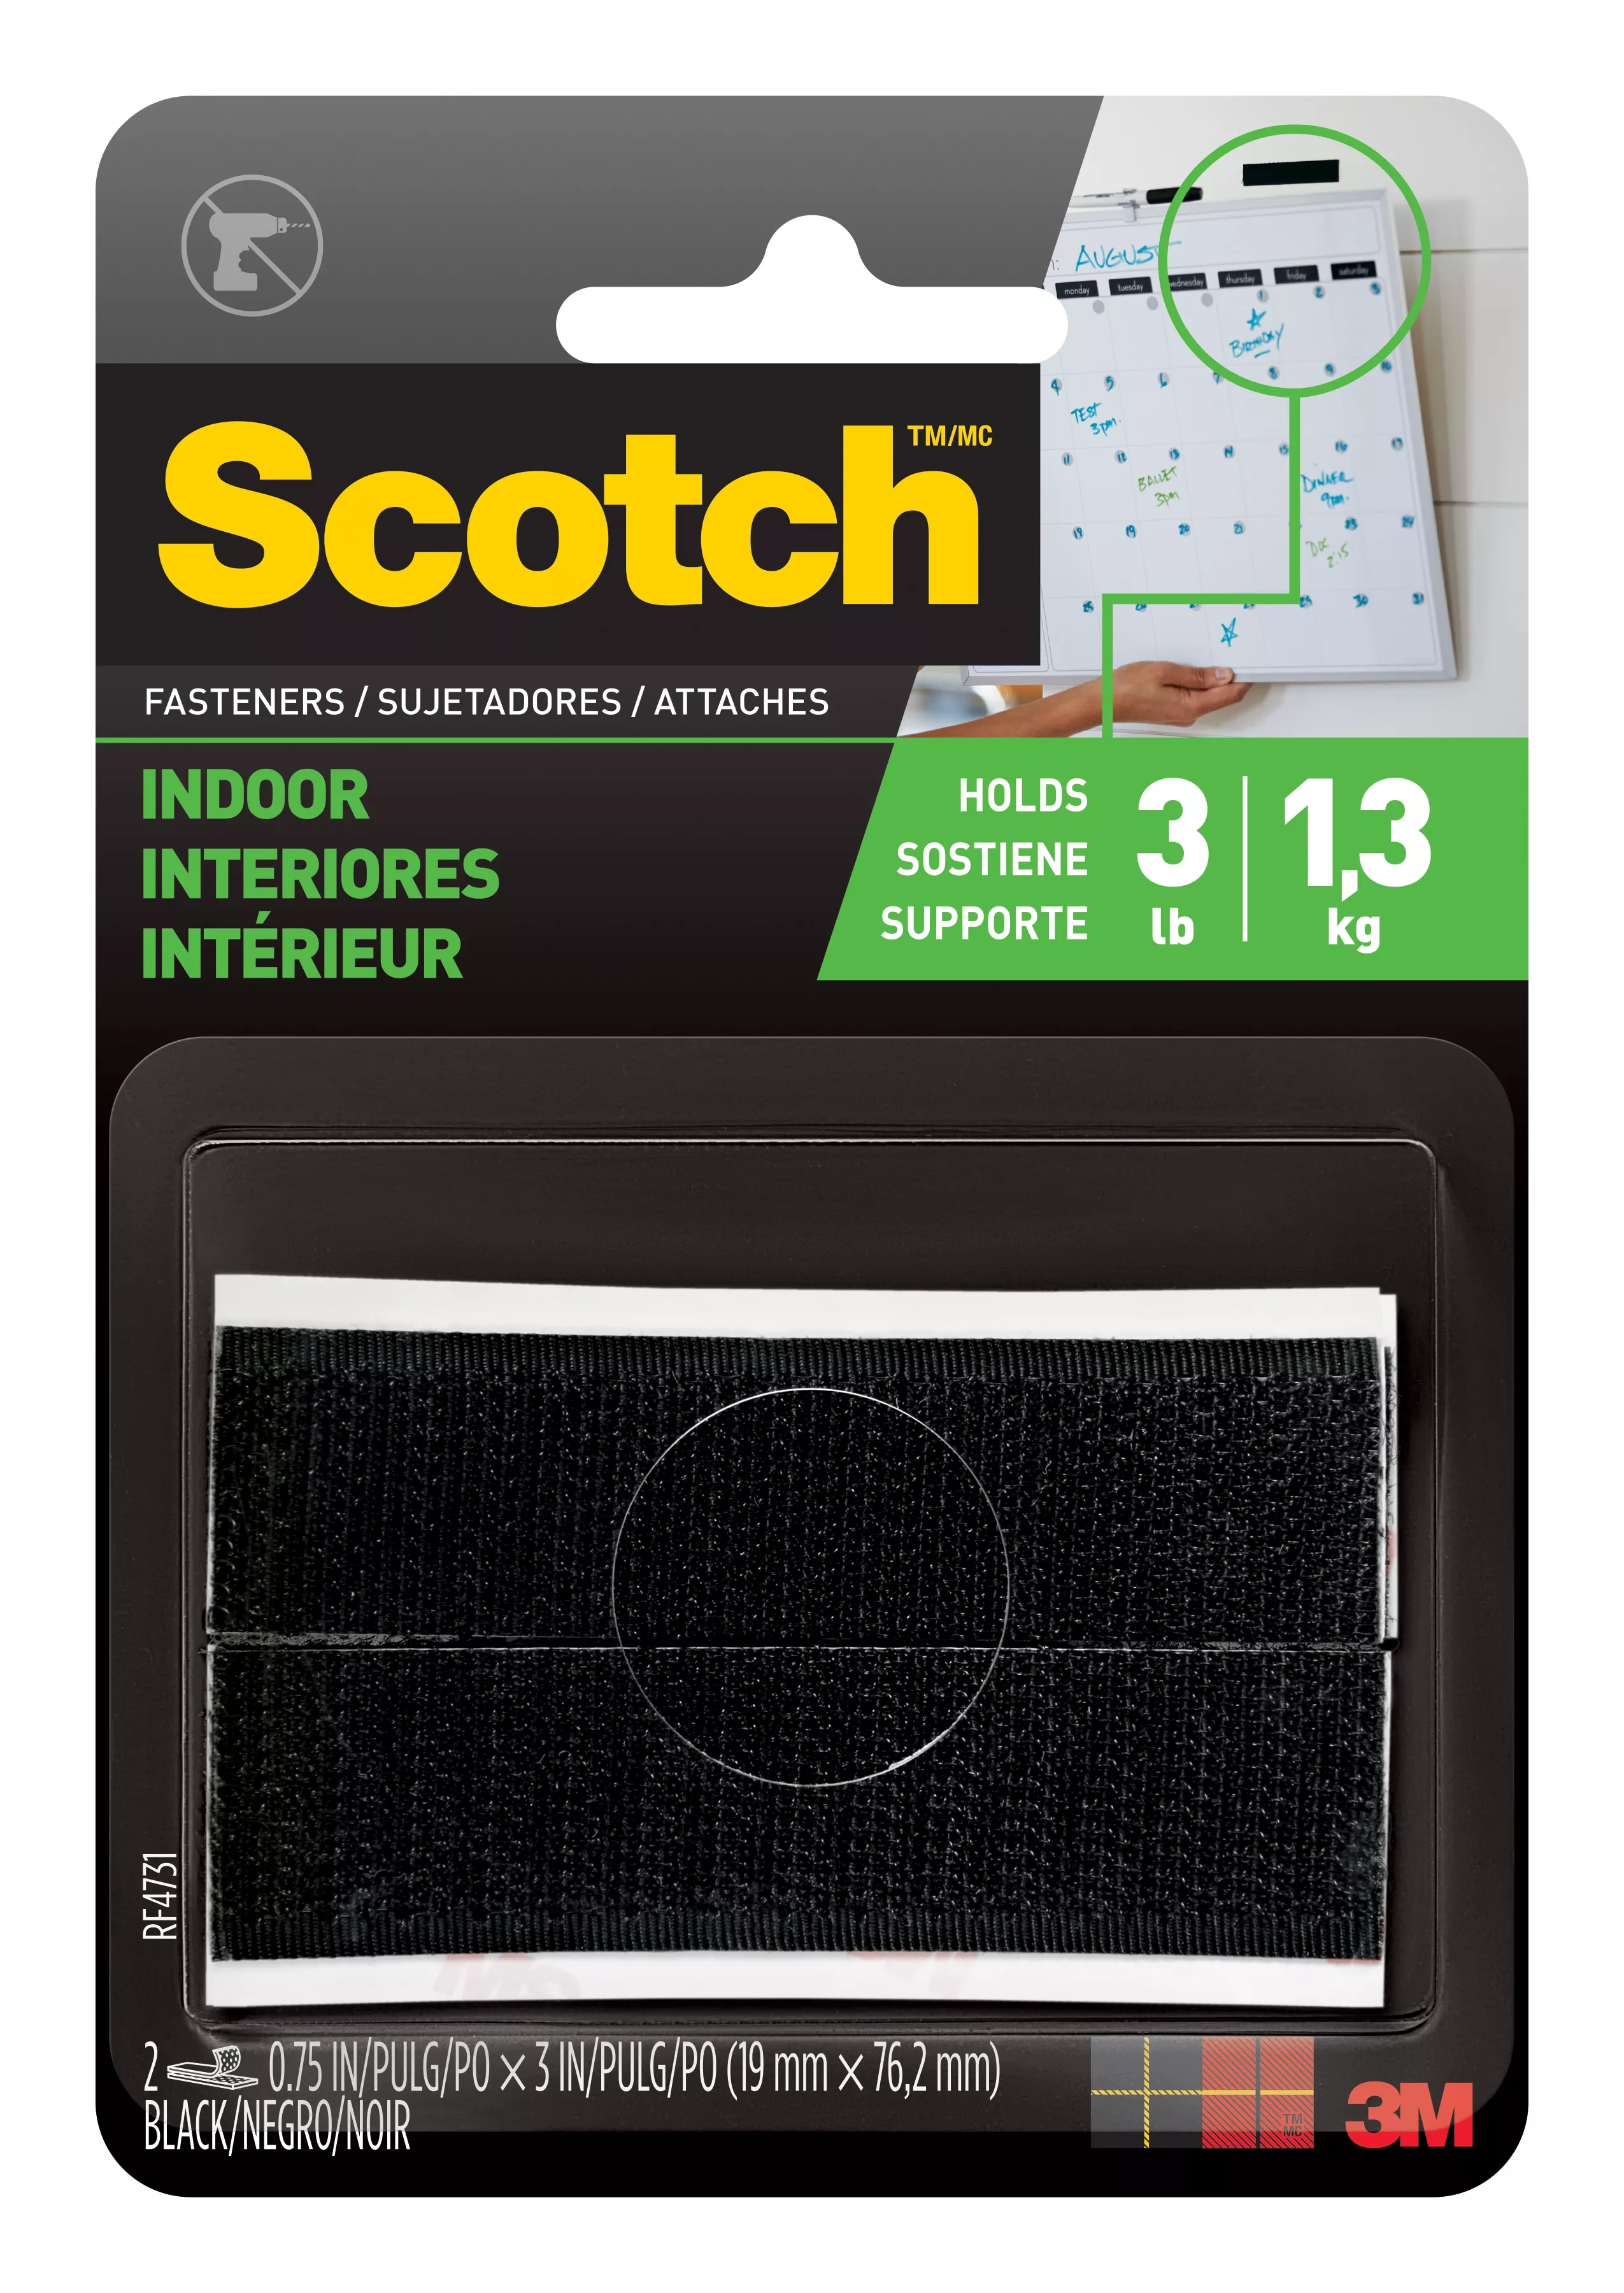 Scotch™ Indoor Fasteners RF4731, 3/4 in x 3 in (19,0 mm x 76,2 mm),
Black, 2 Sets of Strips